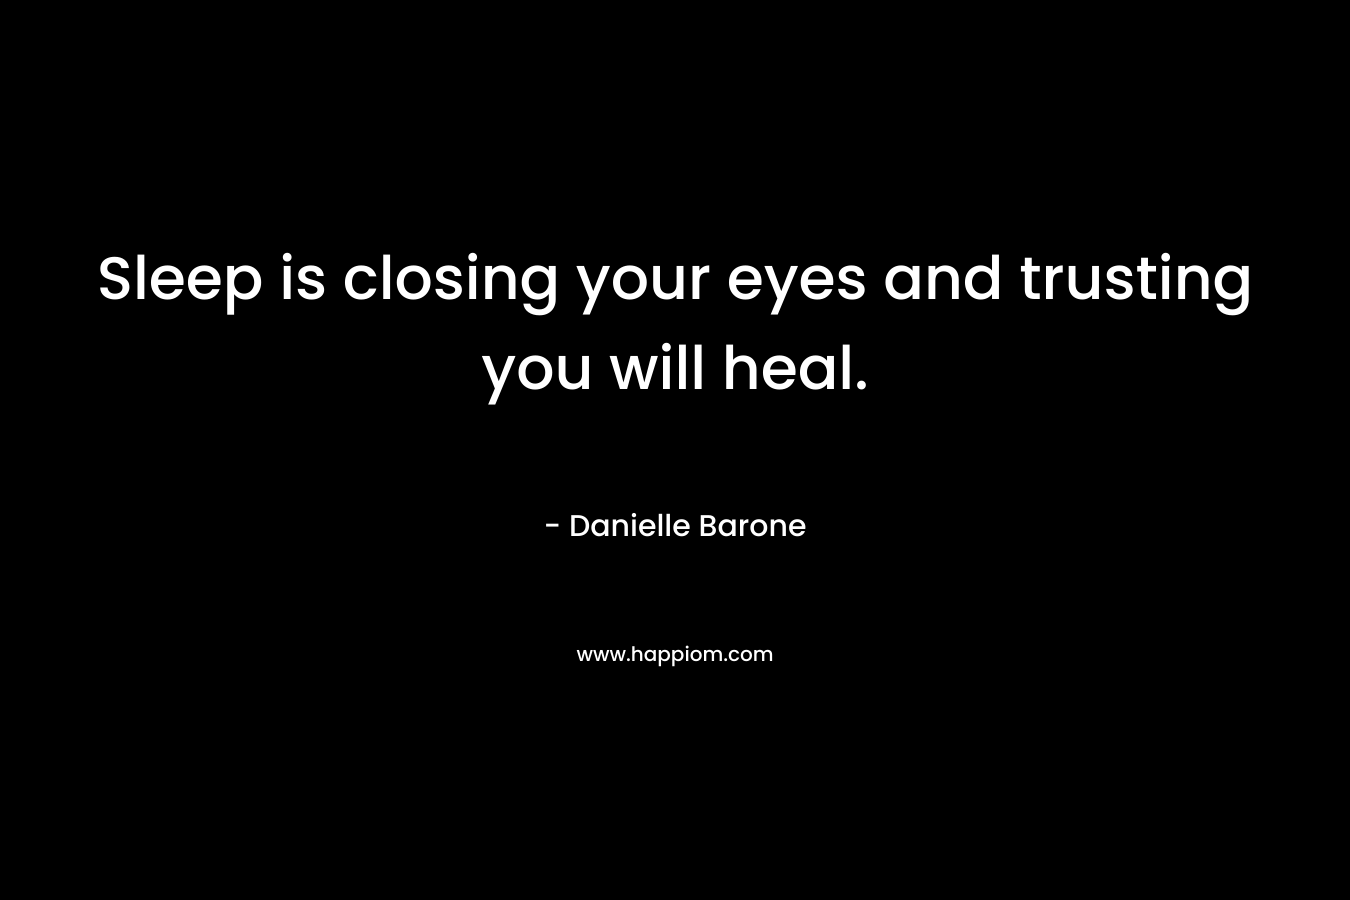 Sleep is closing your eyes and trusting you will heal. – Danielle Barone